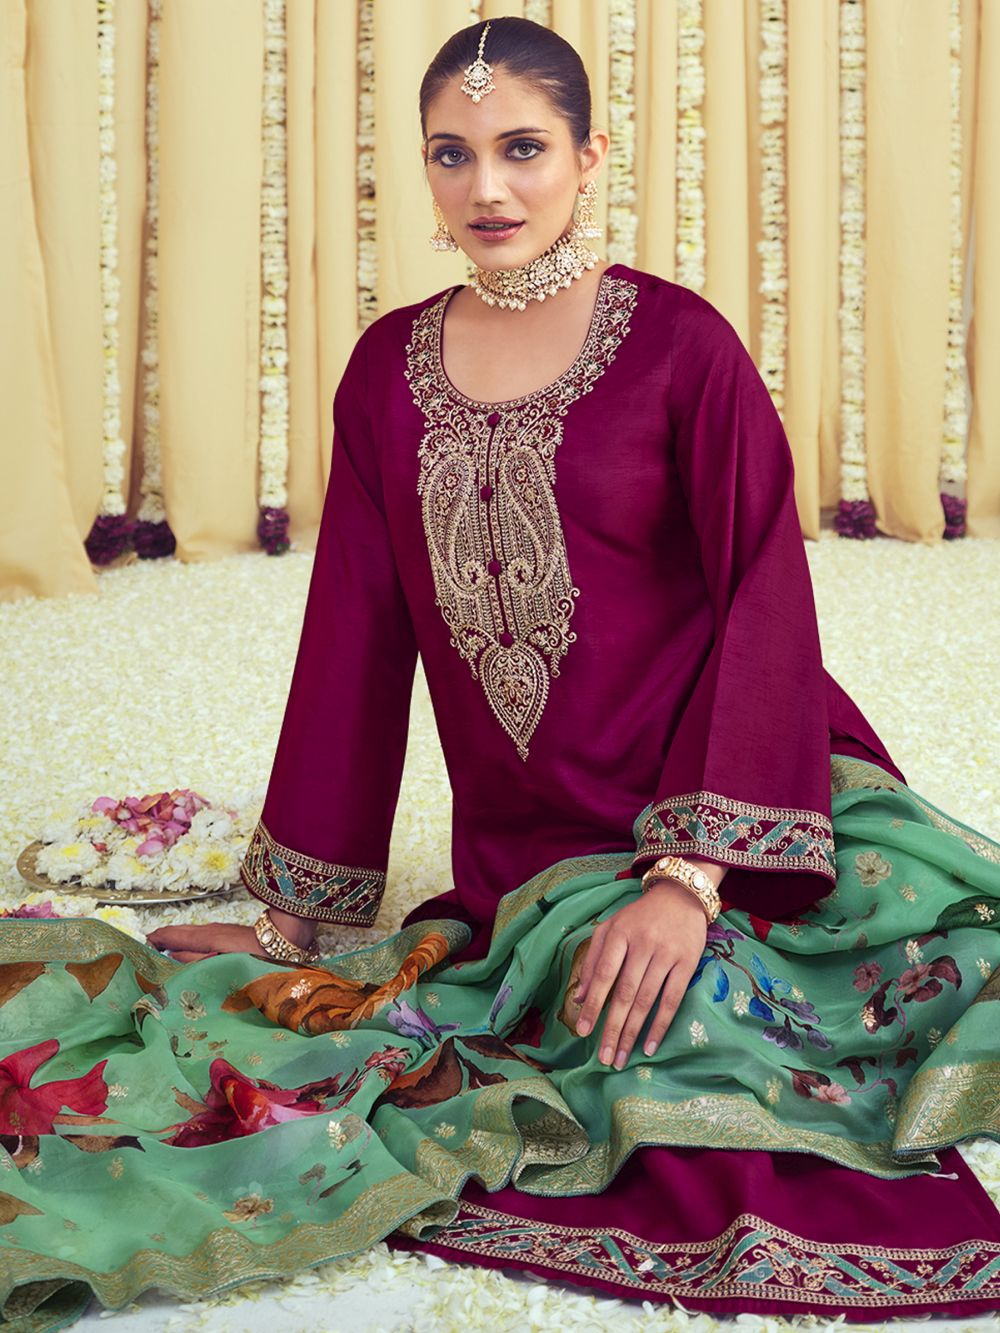 Magenta Raw Silk Embroidered Dress Material